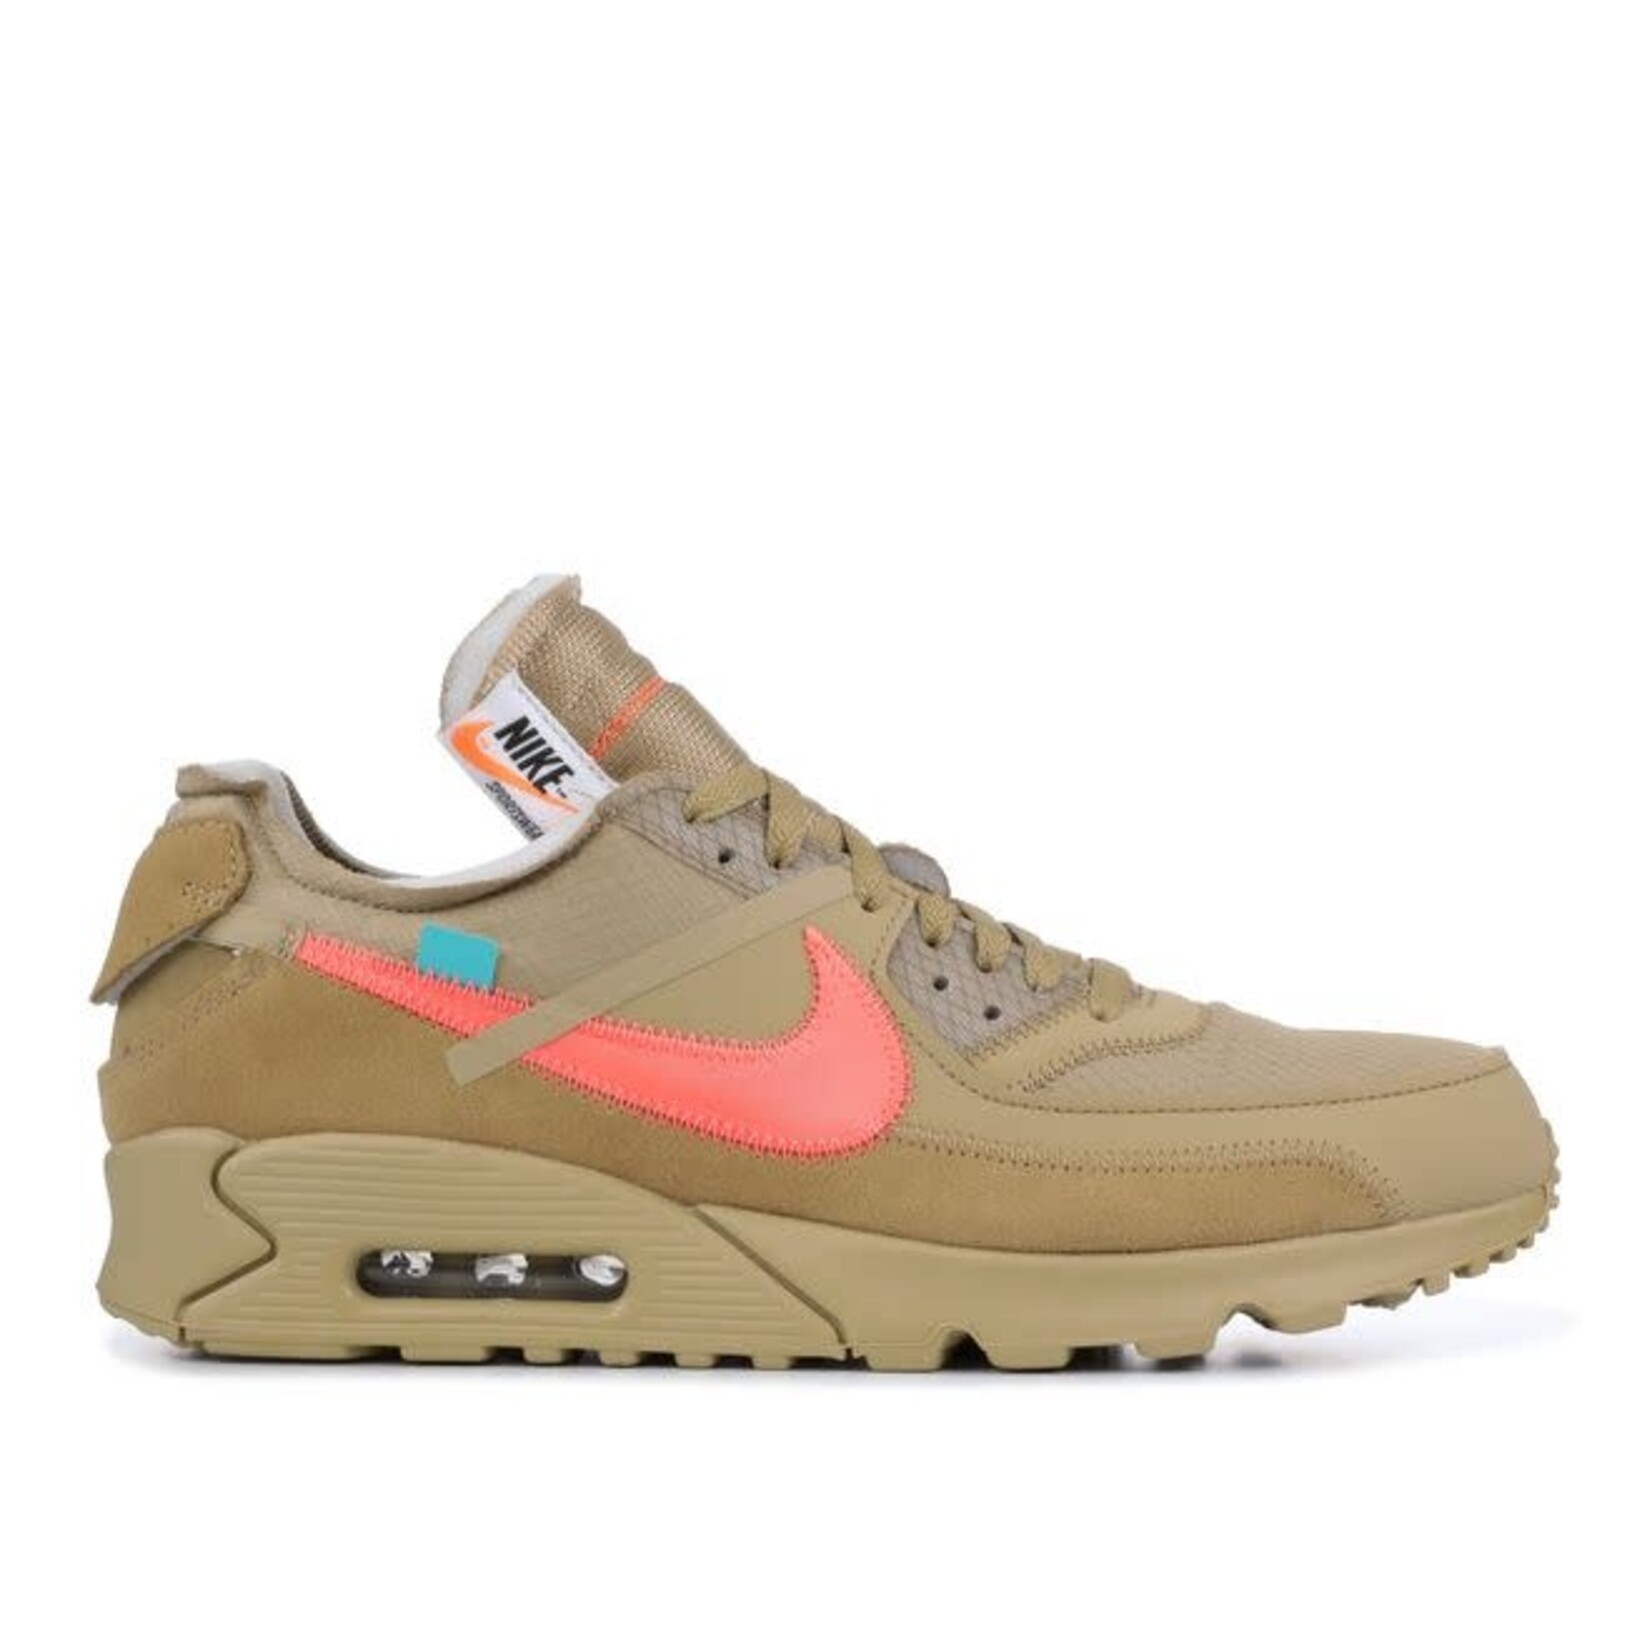 Nike Nike Air Max 90 Off-White Desert Ore Size 9, DS BRAND NEW